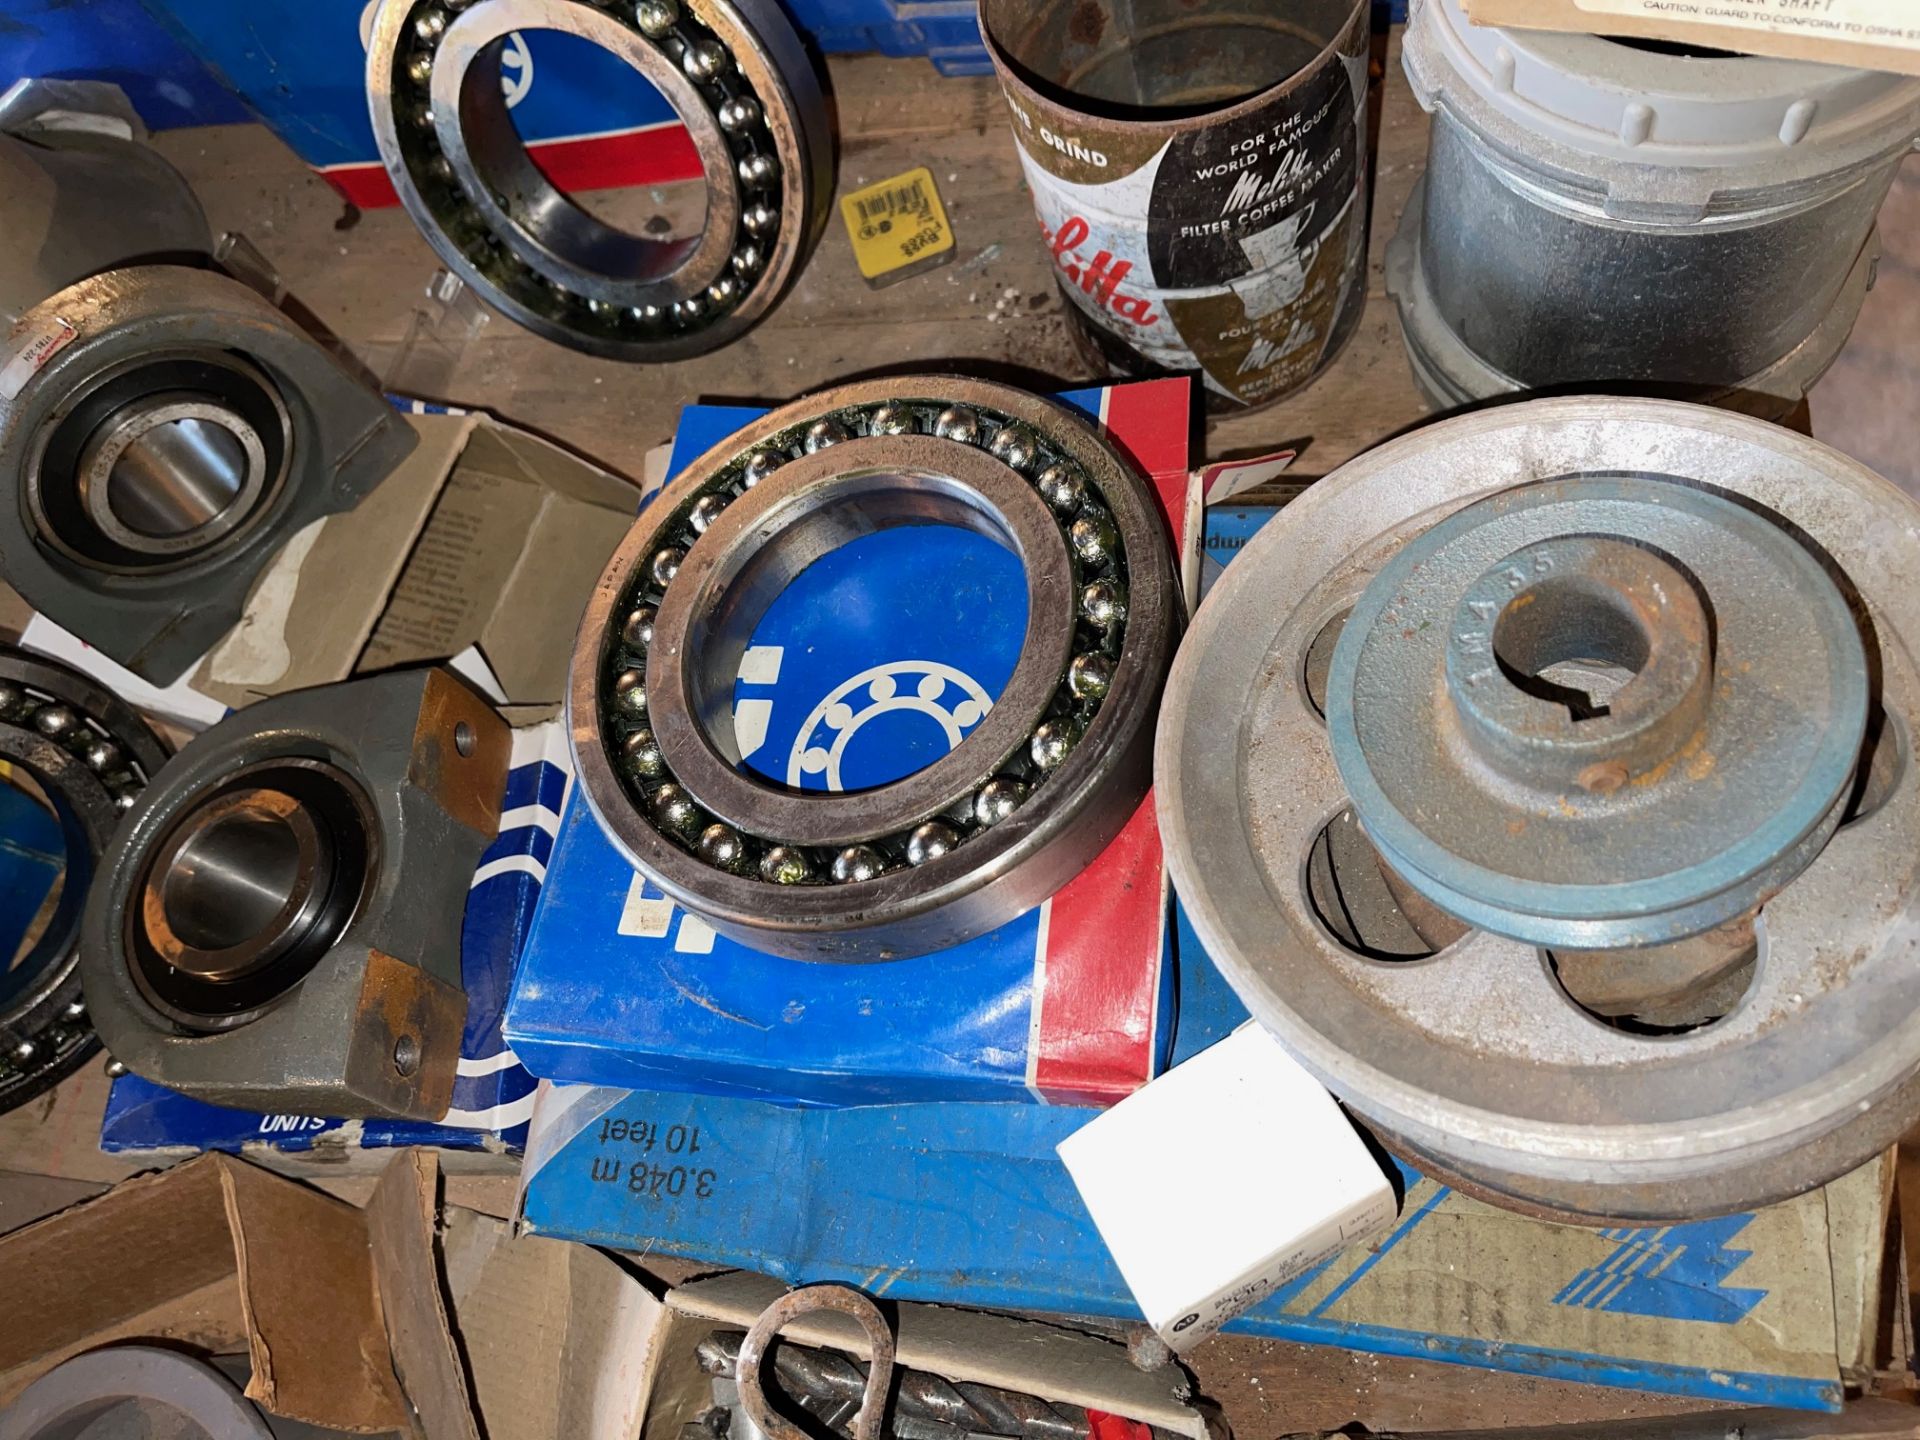 ASSORTED BEARING AND BUSHINGS, IDLER PULLEYS,SHAFT, BROWNING, PULLEYS, WELDING HELMETS - Image 2 of 7